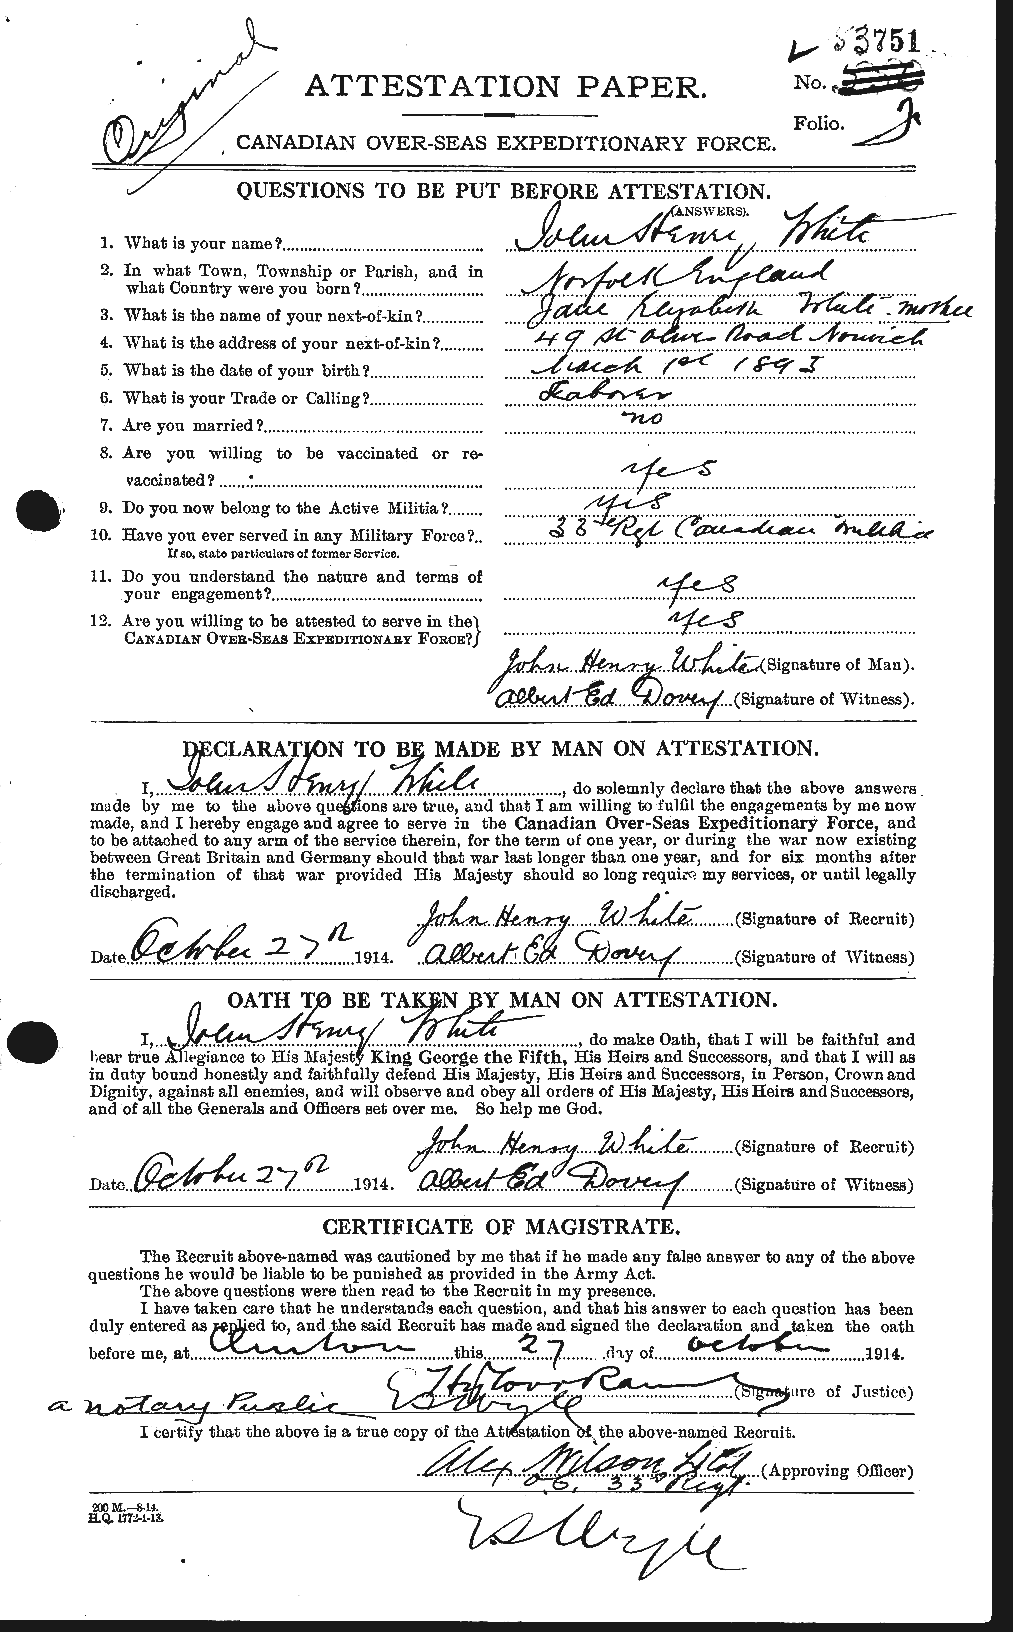 Personnel Records of the First World War - CEF 671570a